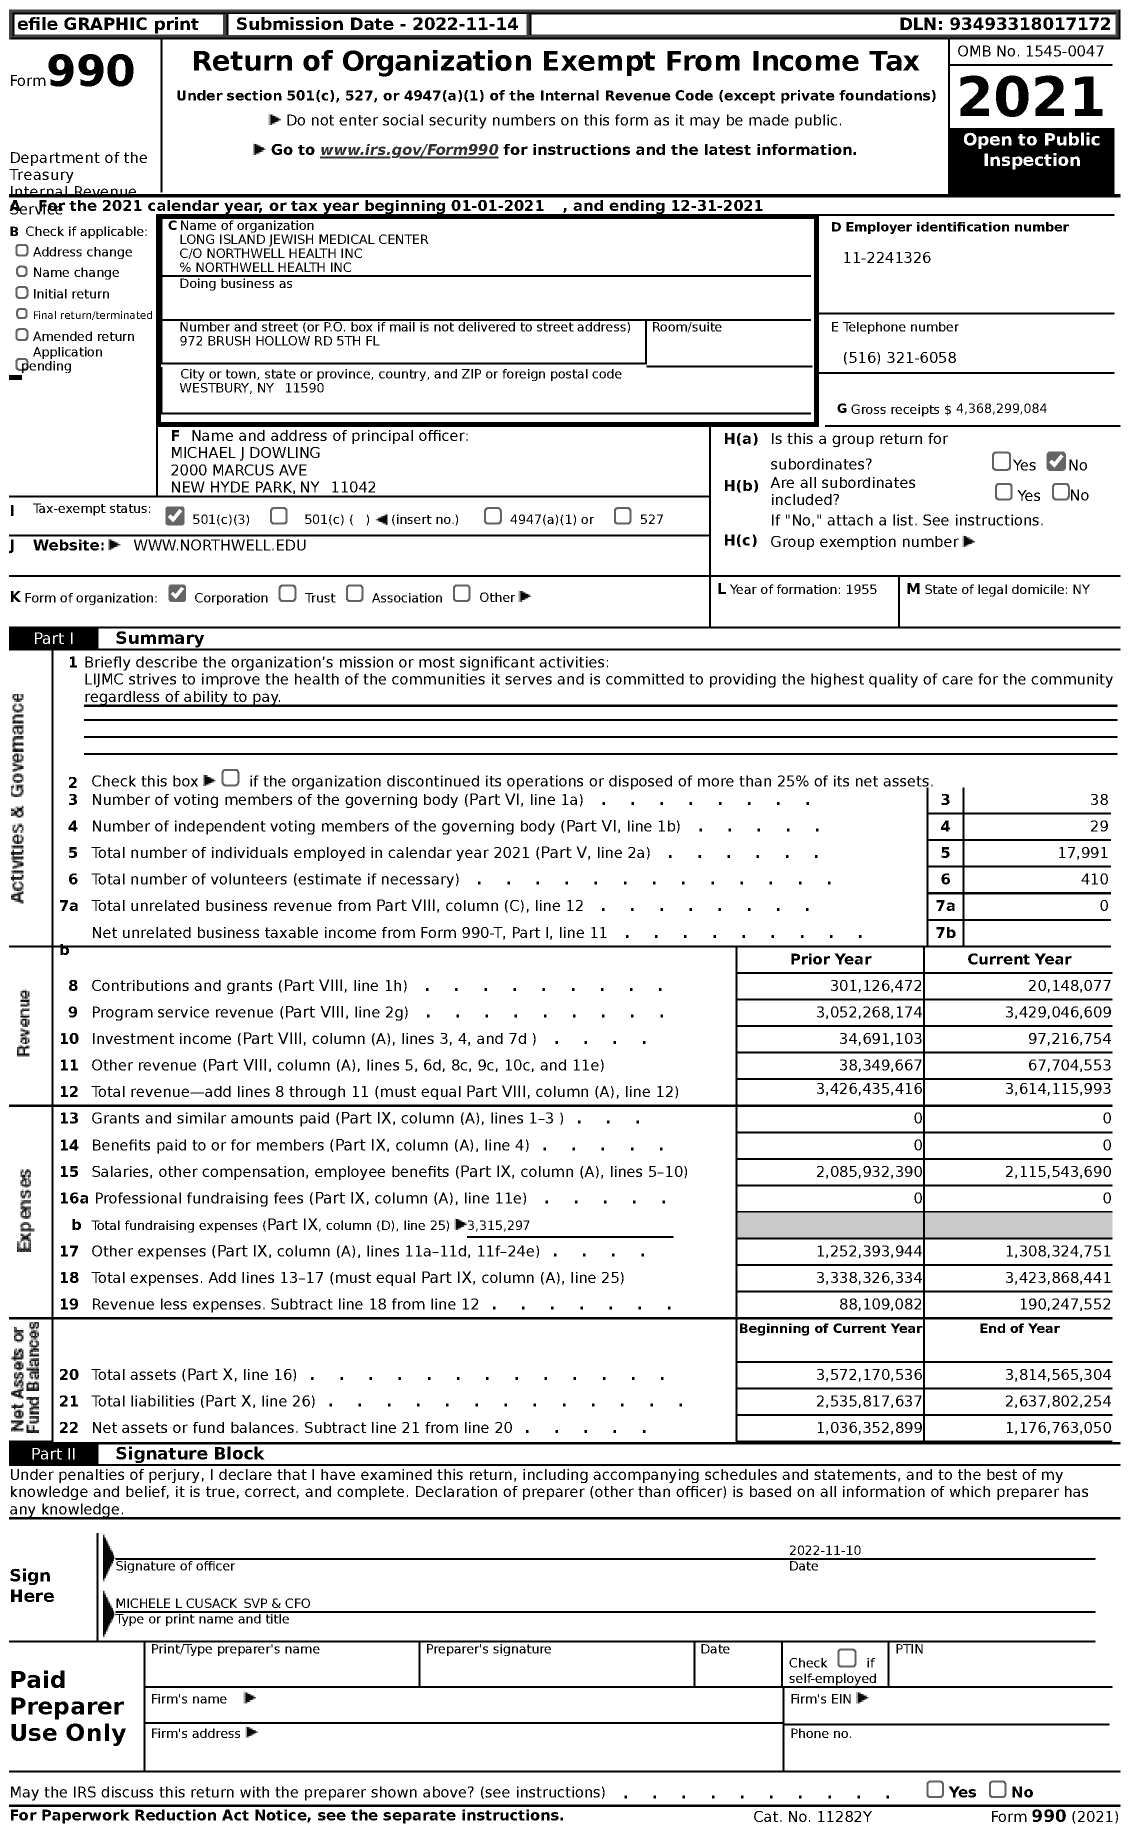 Image of first page of 2021 Form 990 for Long Island Jewish Medical Center (LIJMC)